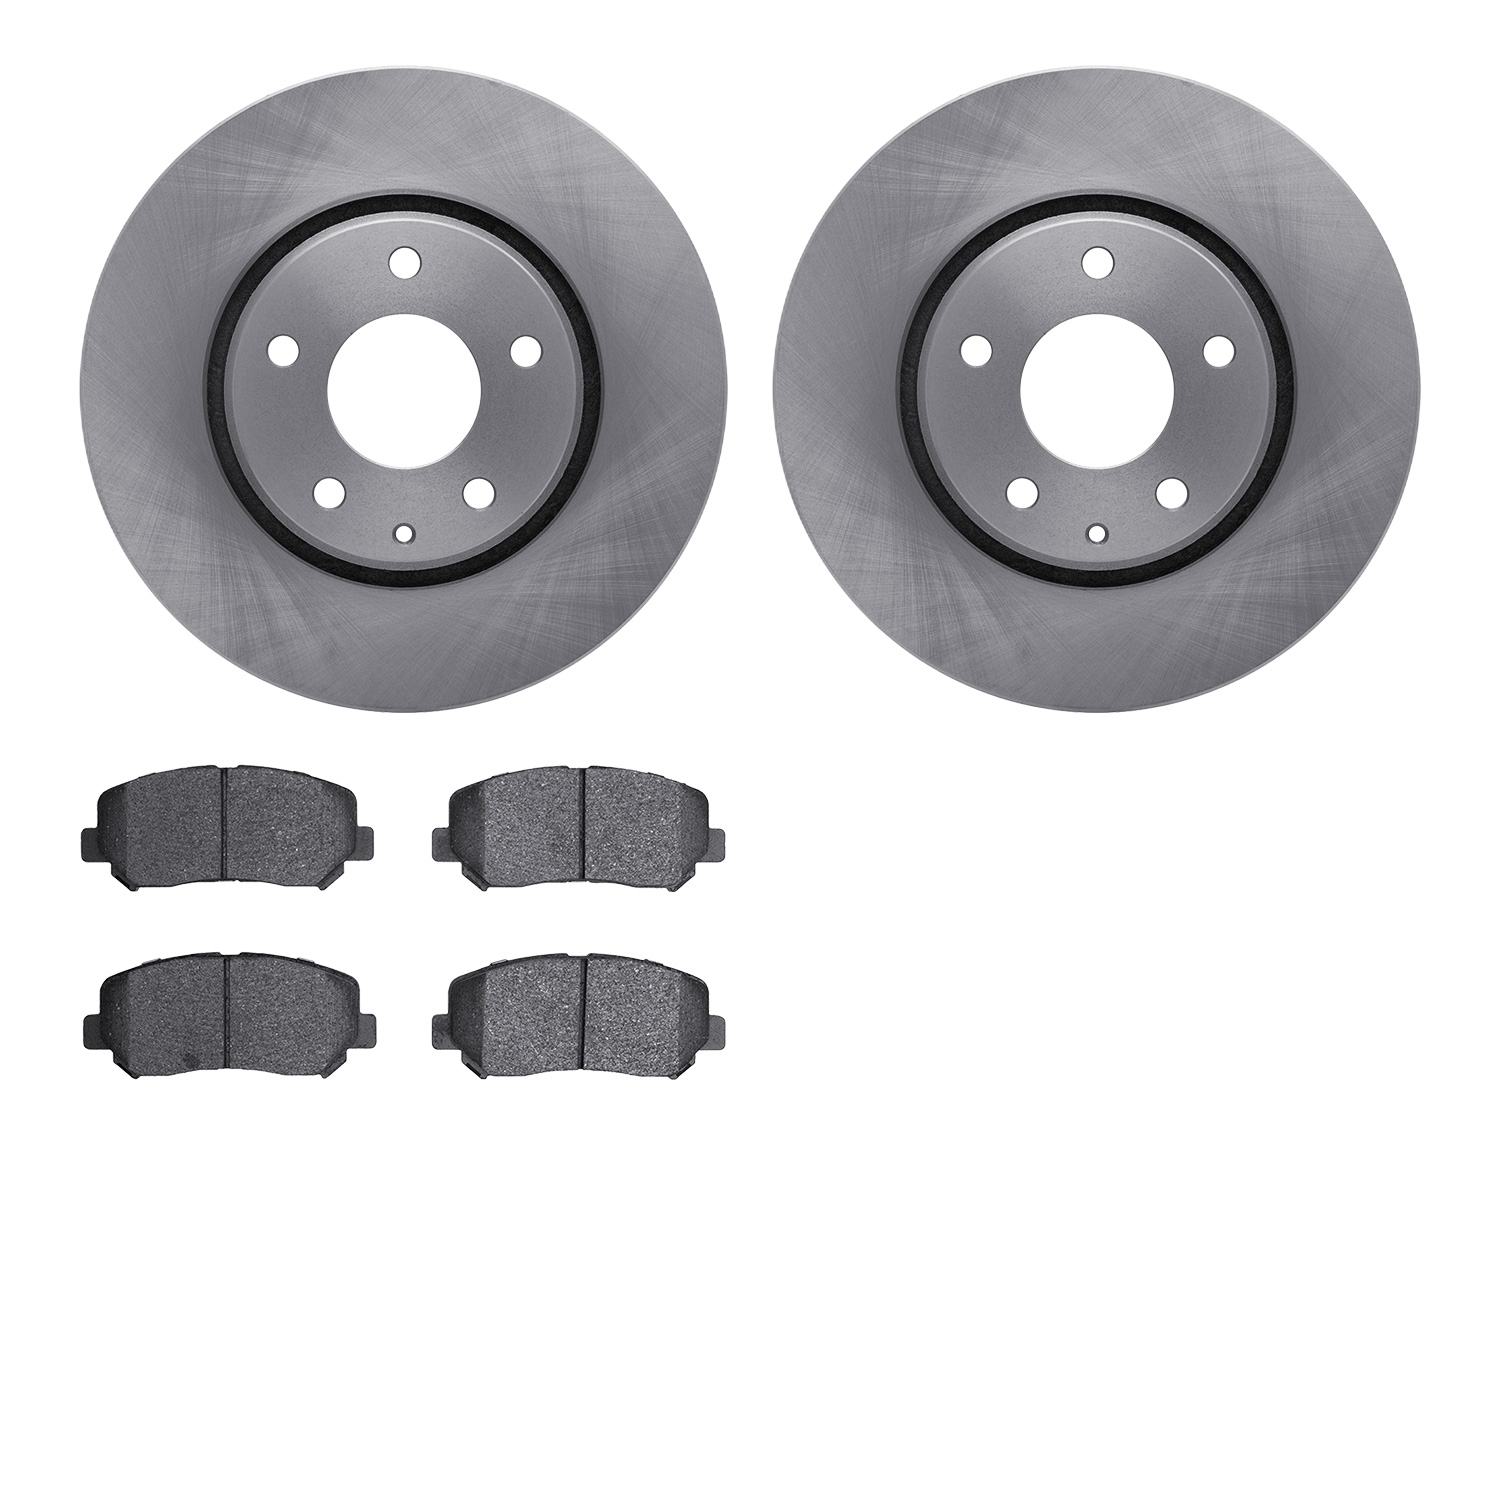 6502-80349 Brake Rotors w/5000 Advanced Brake Pads Kit, Fits Select Ford/Lincoln/Mercury/Mazda, Position: Front